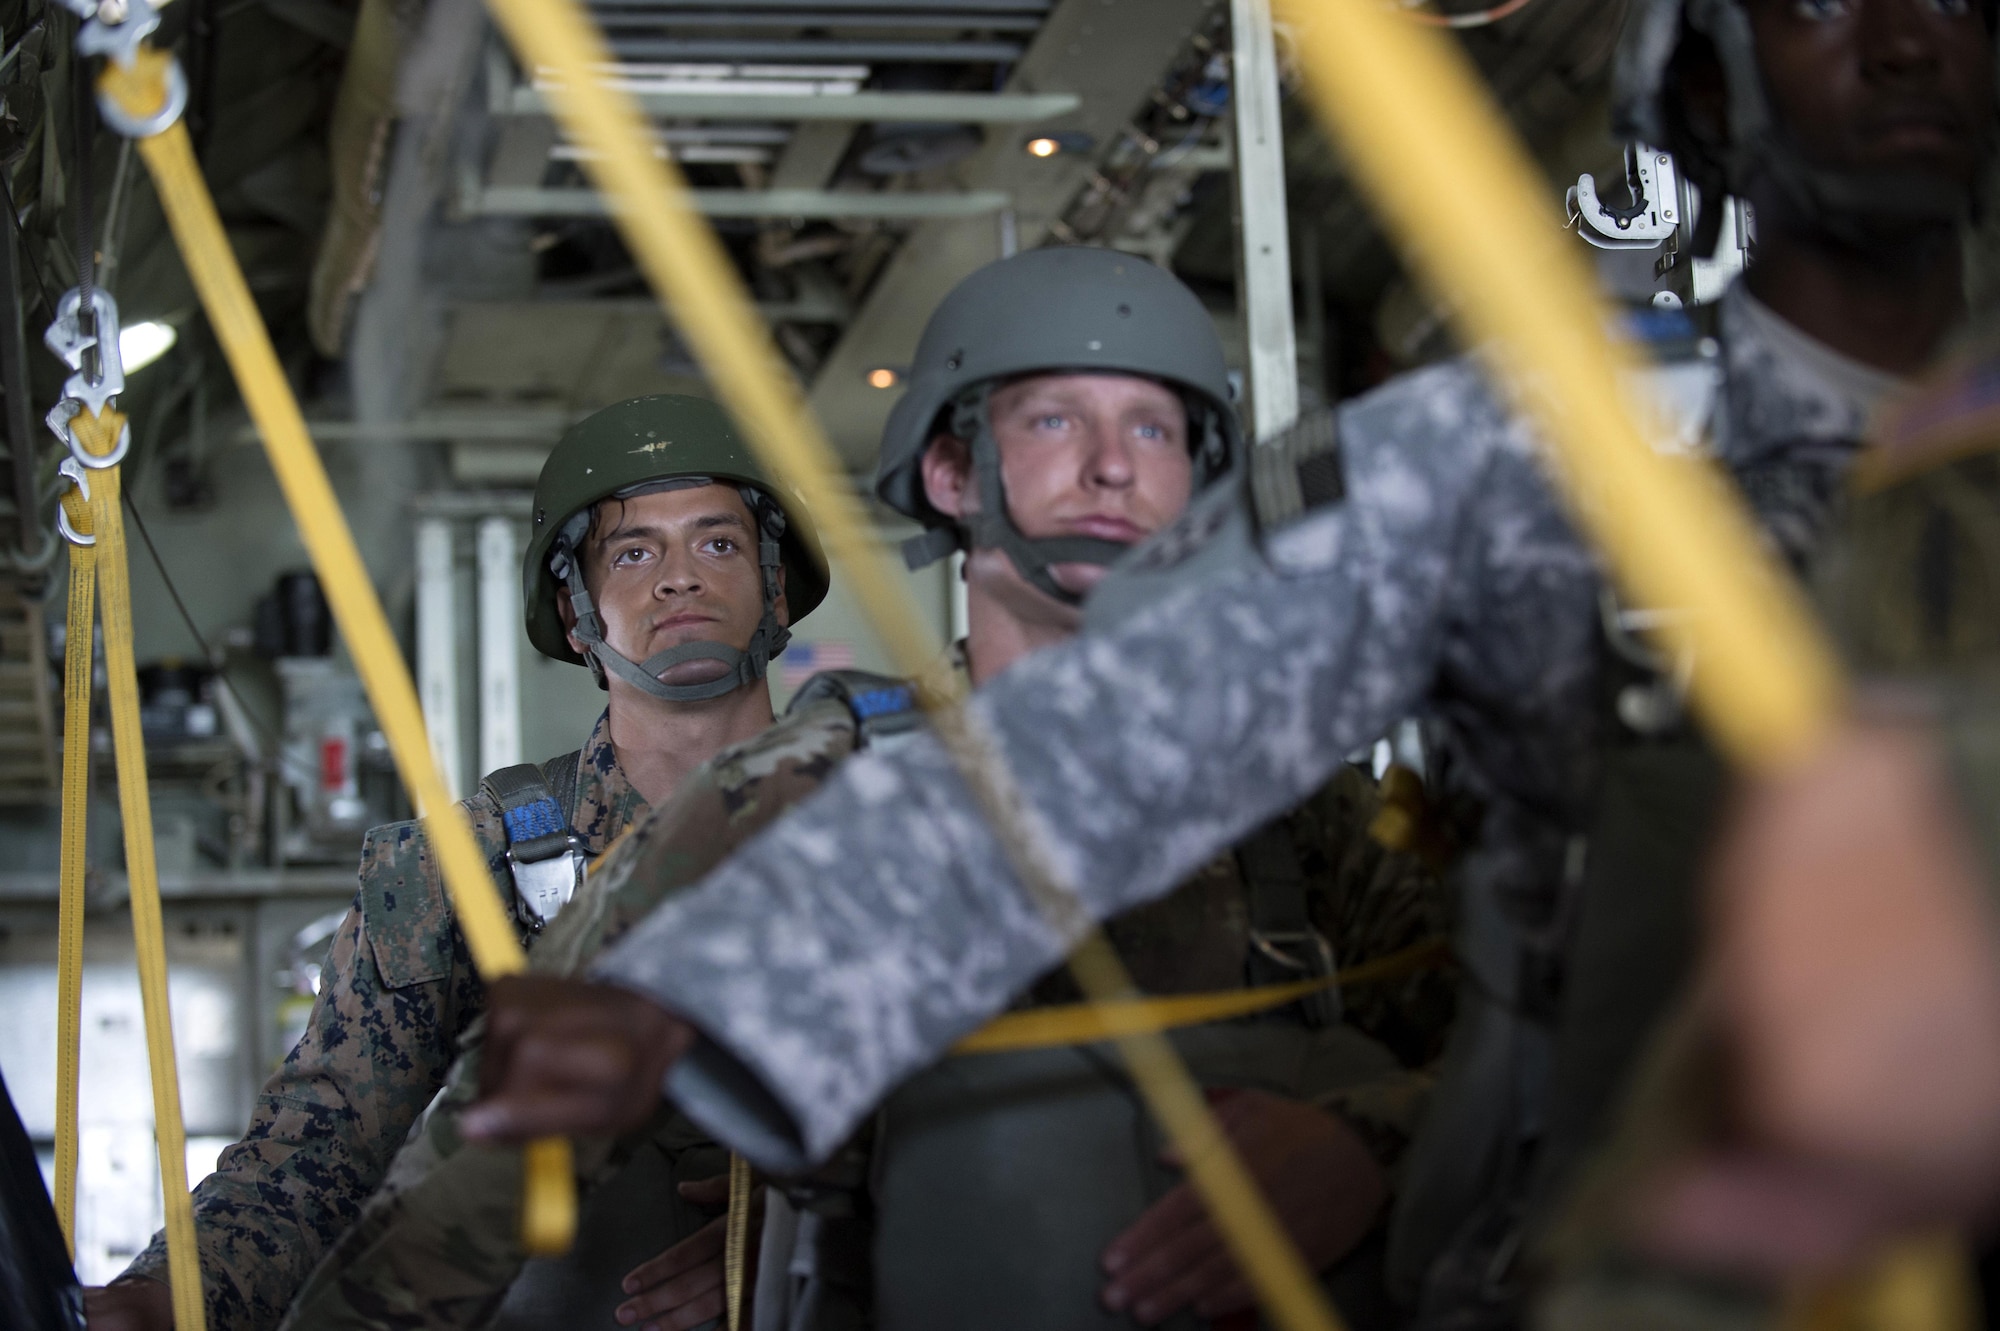 U.S. Army Service members assigned to MacDill Air Force Base, Fla., stand up and prepare to jump out of a C-130 Hercules Aircraft over Brooksville, Fla., July 15, 2017. Once given the go ahead by the jumpmaster, service members prepare to perform gear checks. (U.S Air Force Photo by Airman 1st Class Rito Smith)